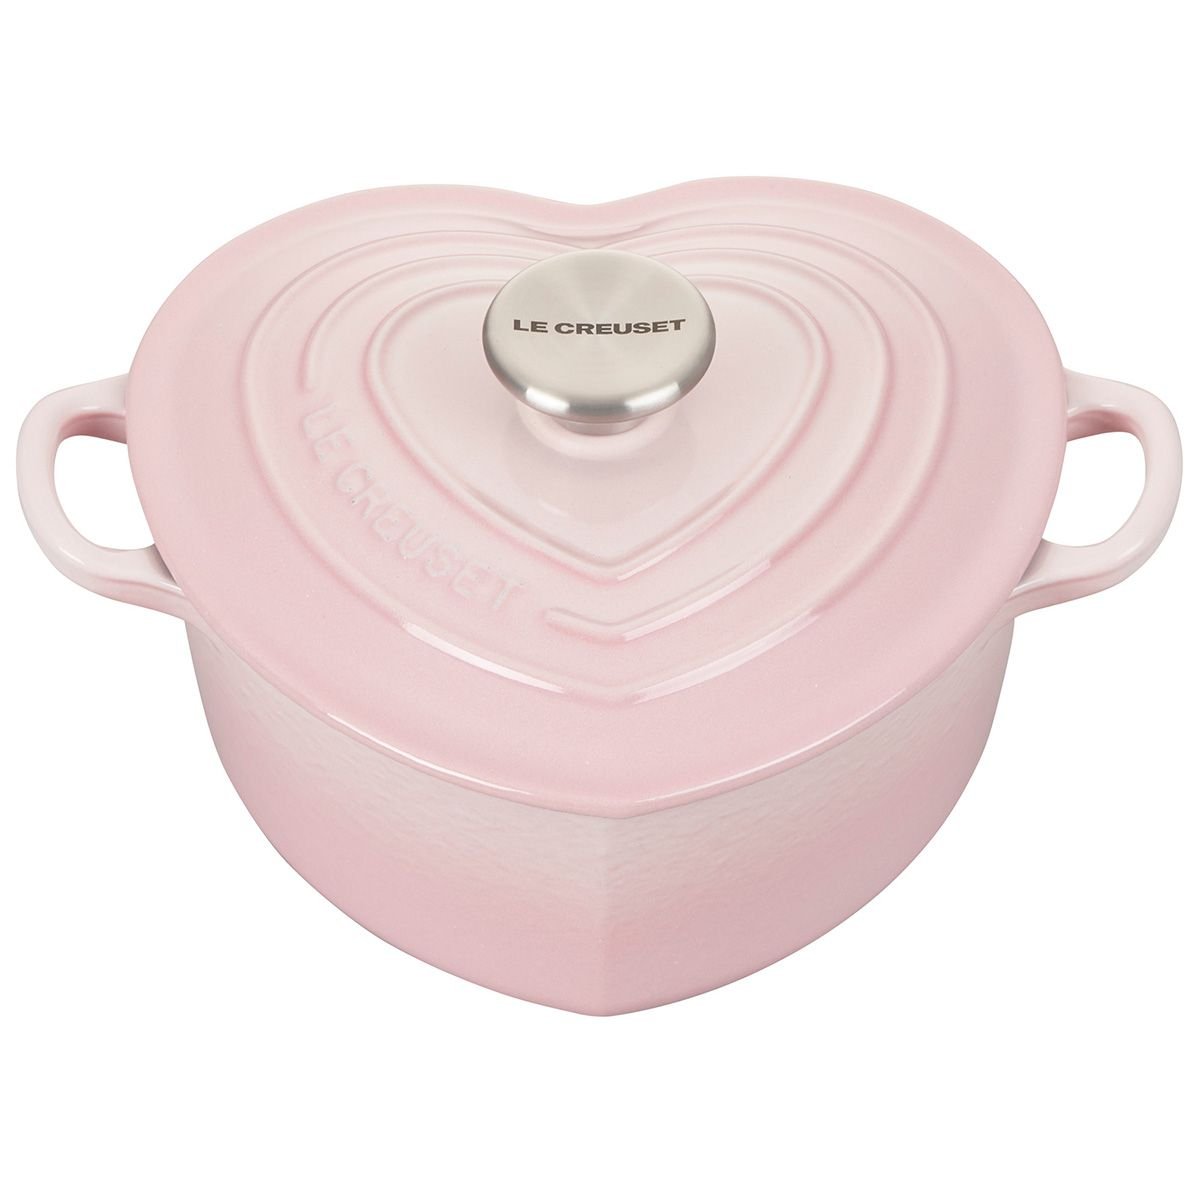 Le Creuset 3.5 Qt. Round Signature Dutch Oven with Stainless Steel Heart  Knob | Cerise/Cherry Red